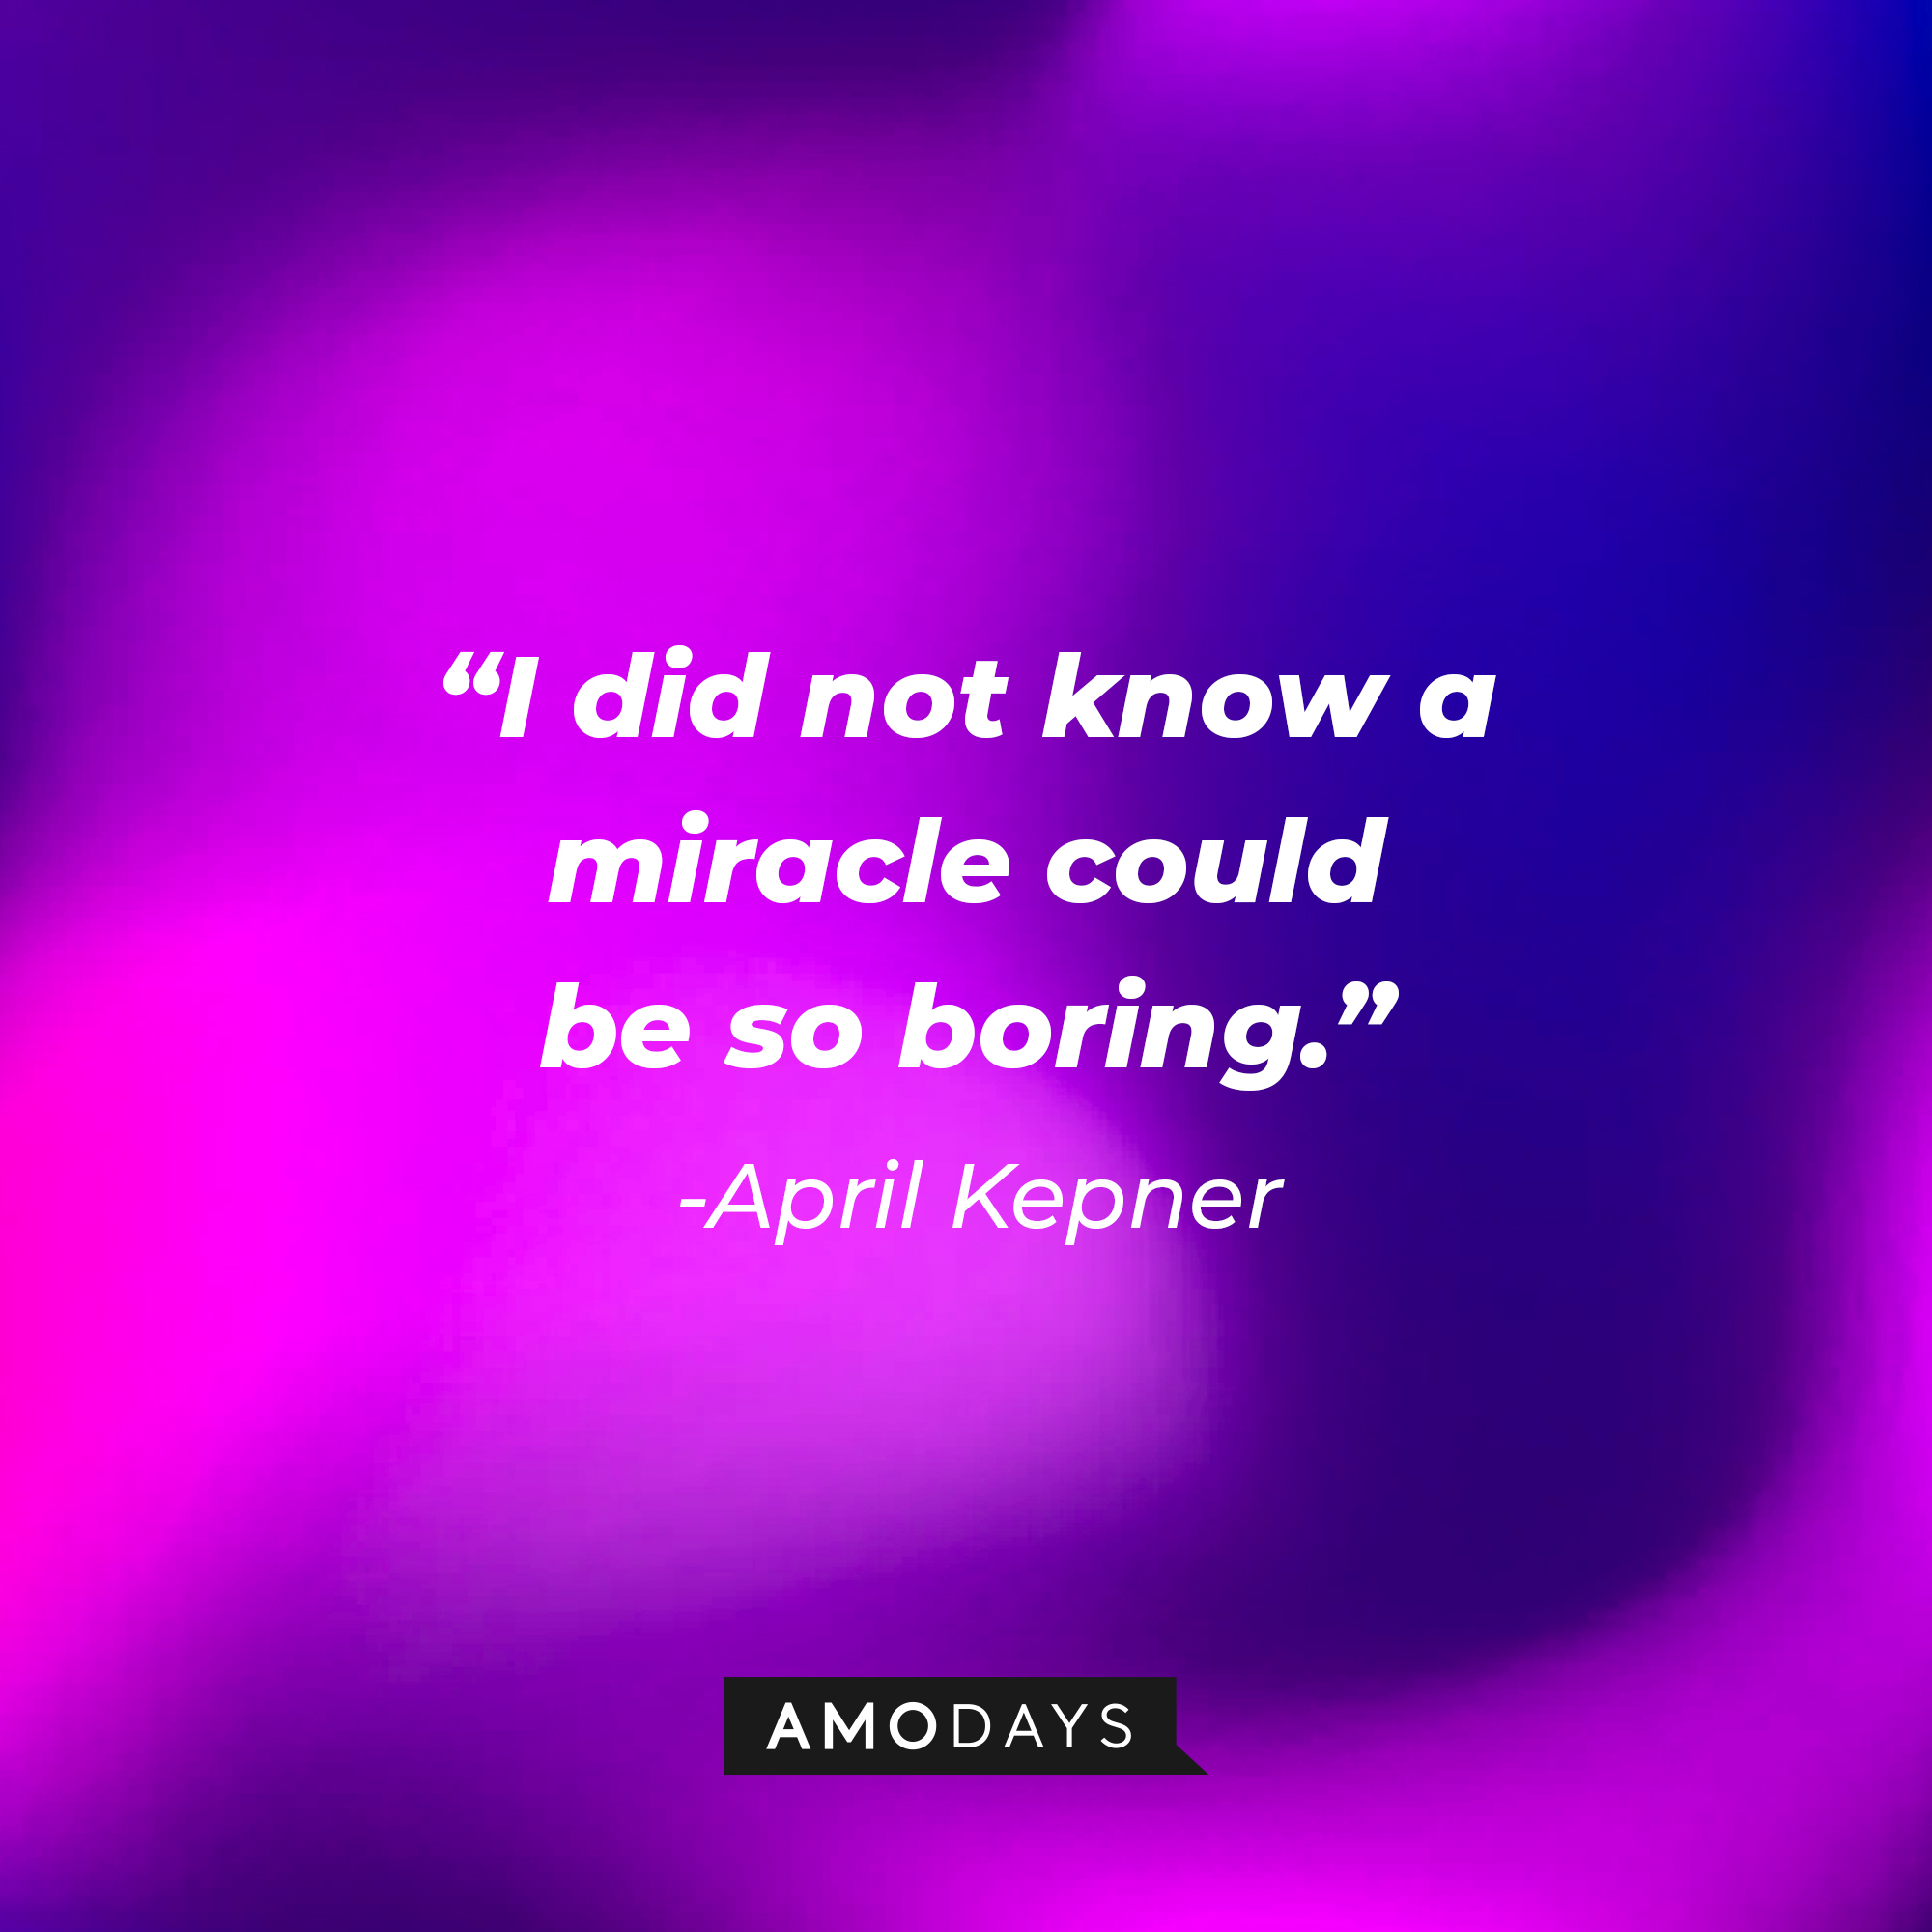 April Kepner's quote: "I did not know a miracle could be so boring." | Source: AmoDays